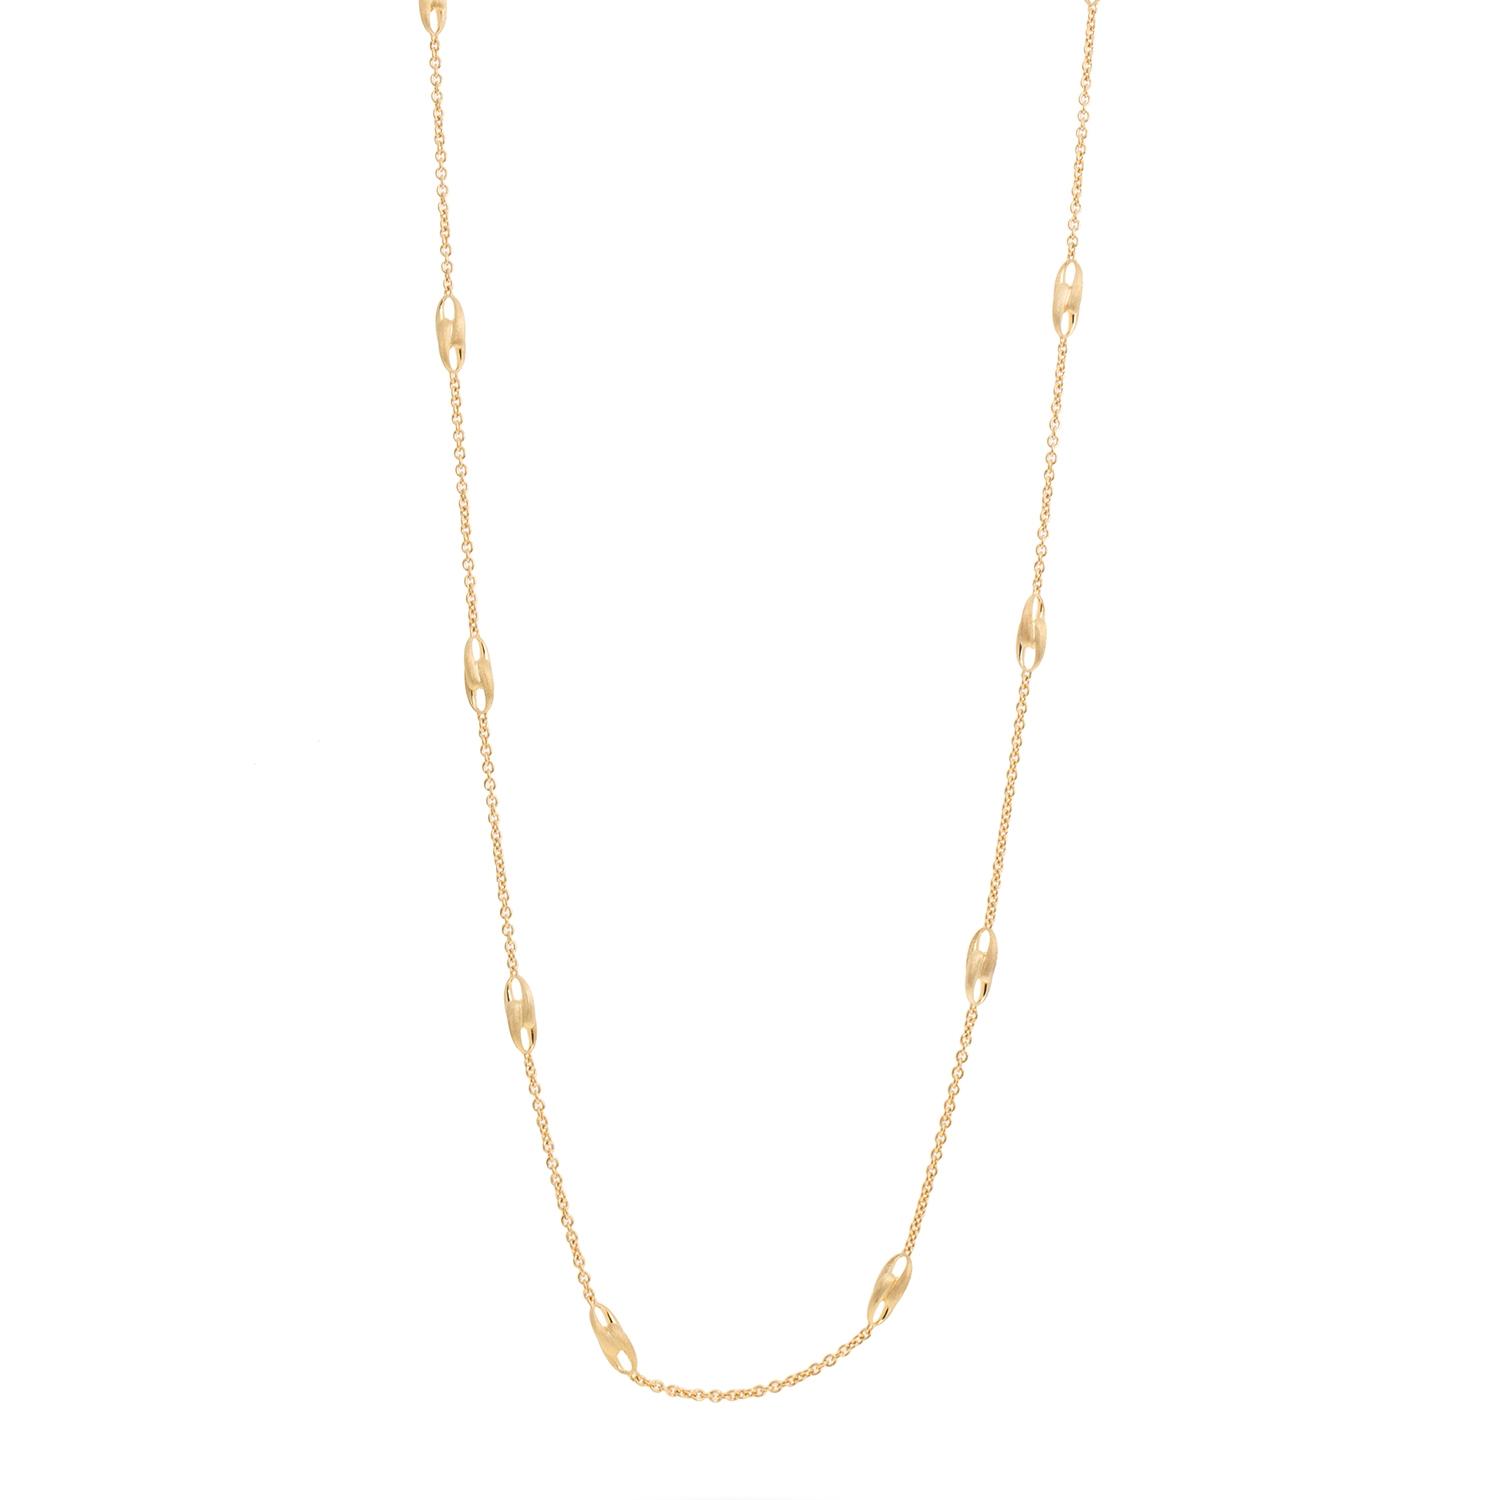 Marco Bicego Lucia Long Link Station Necklace